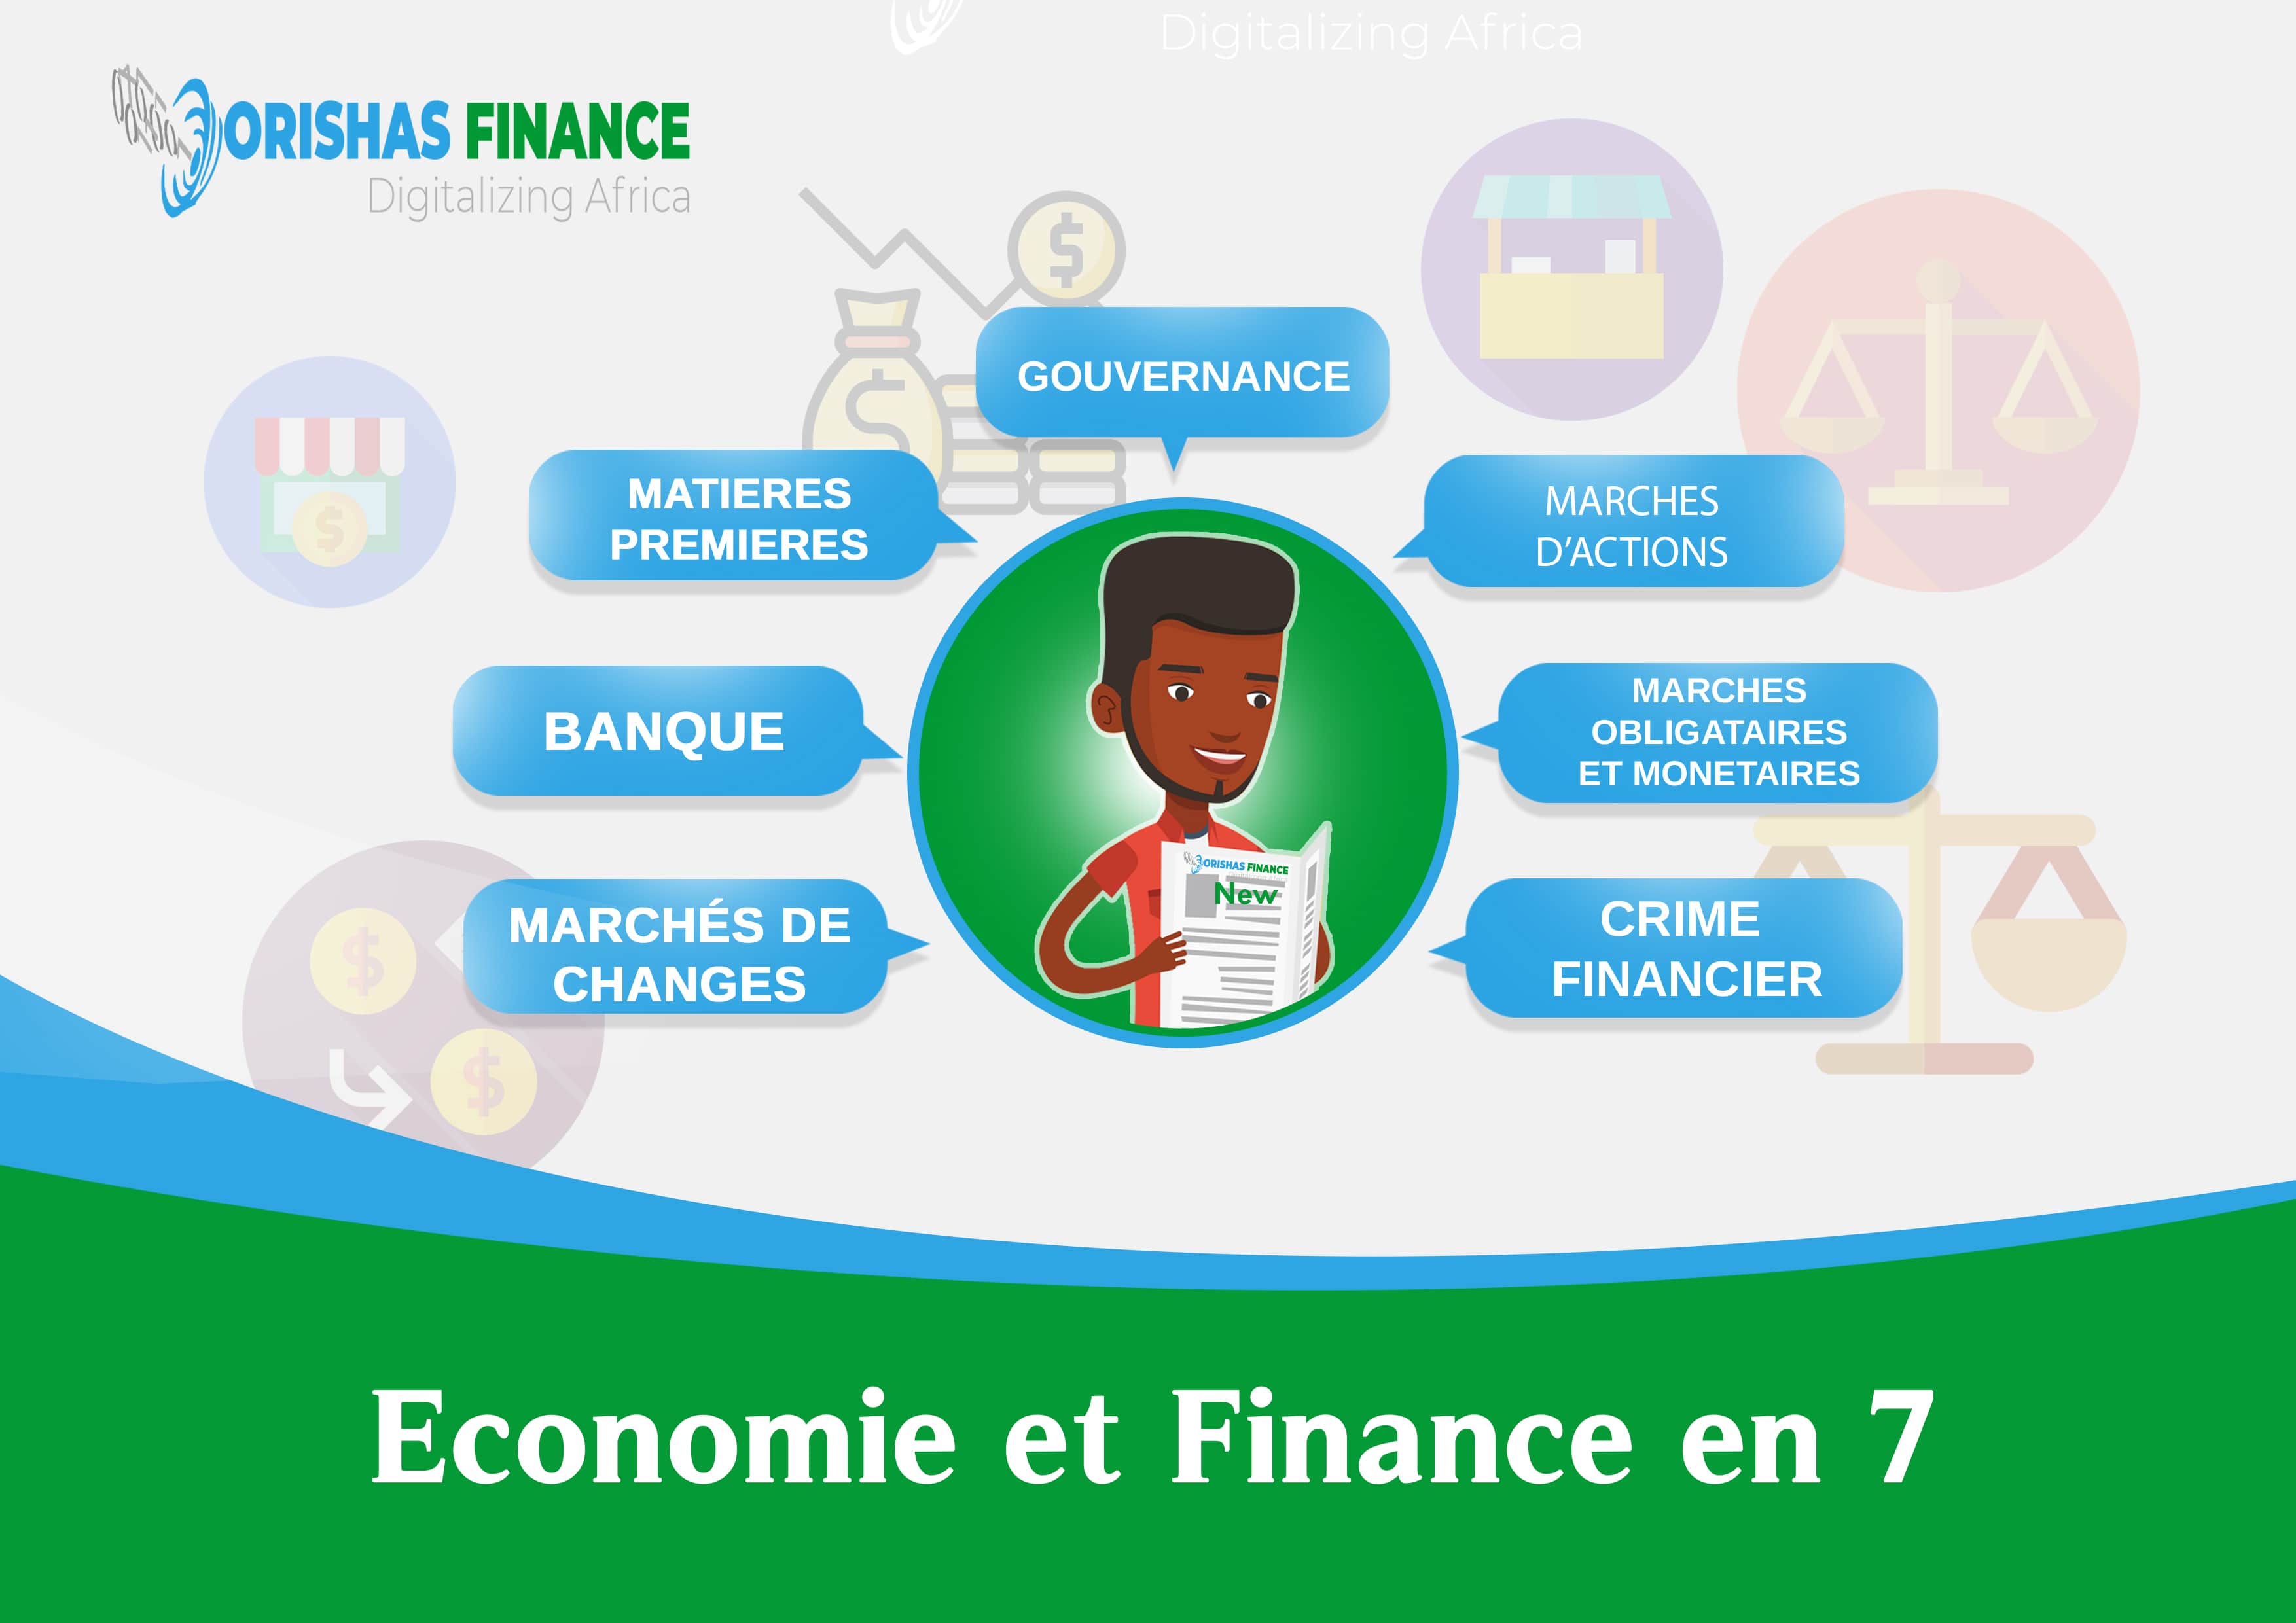  Economy and finance in 7 from May 17 to 21, 2021 